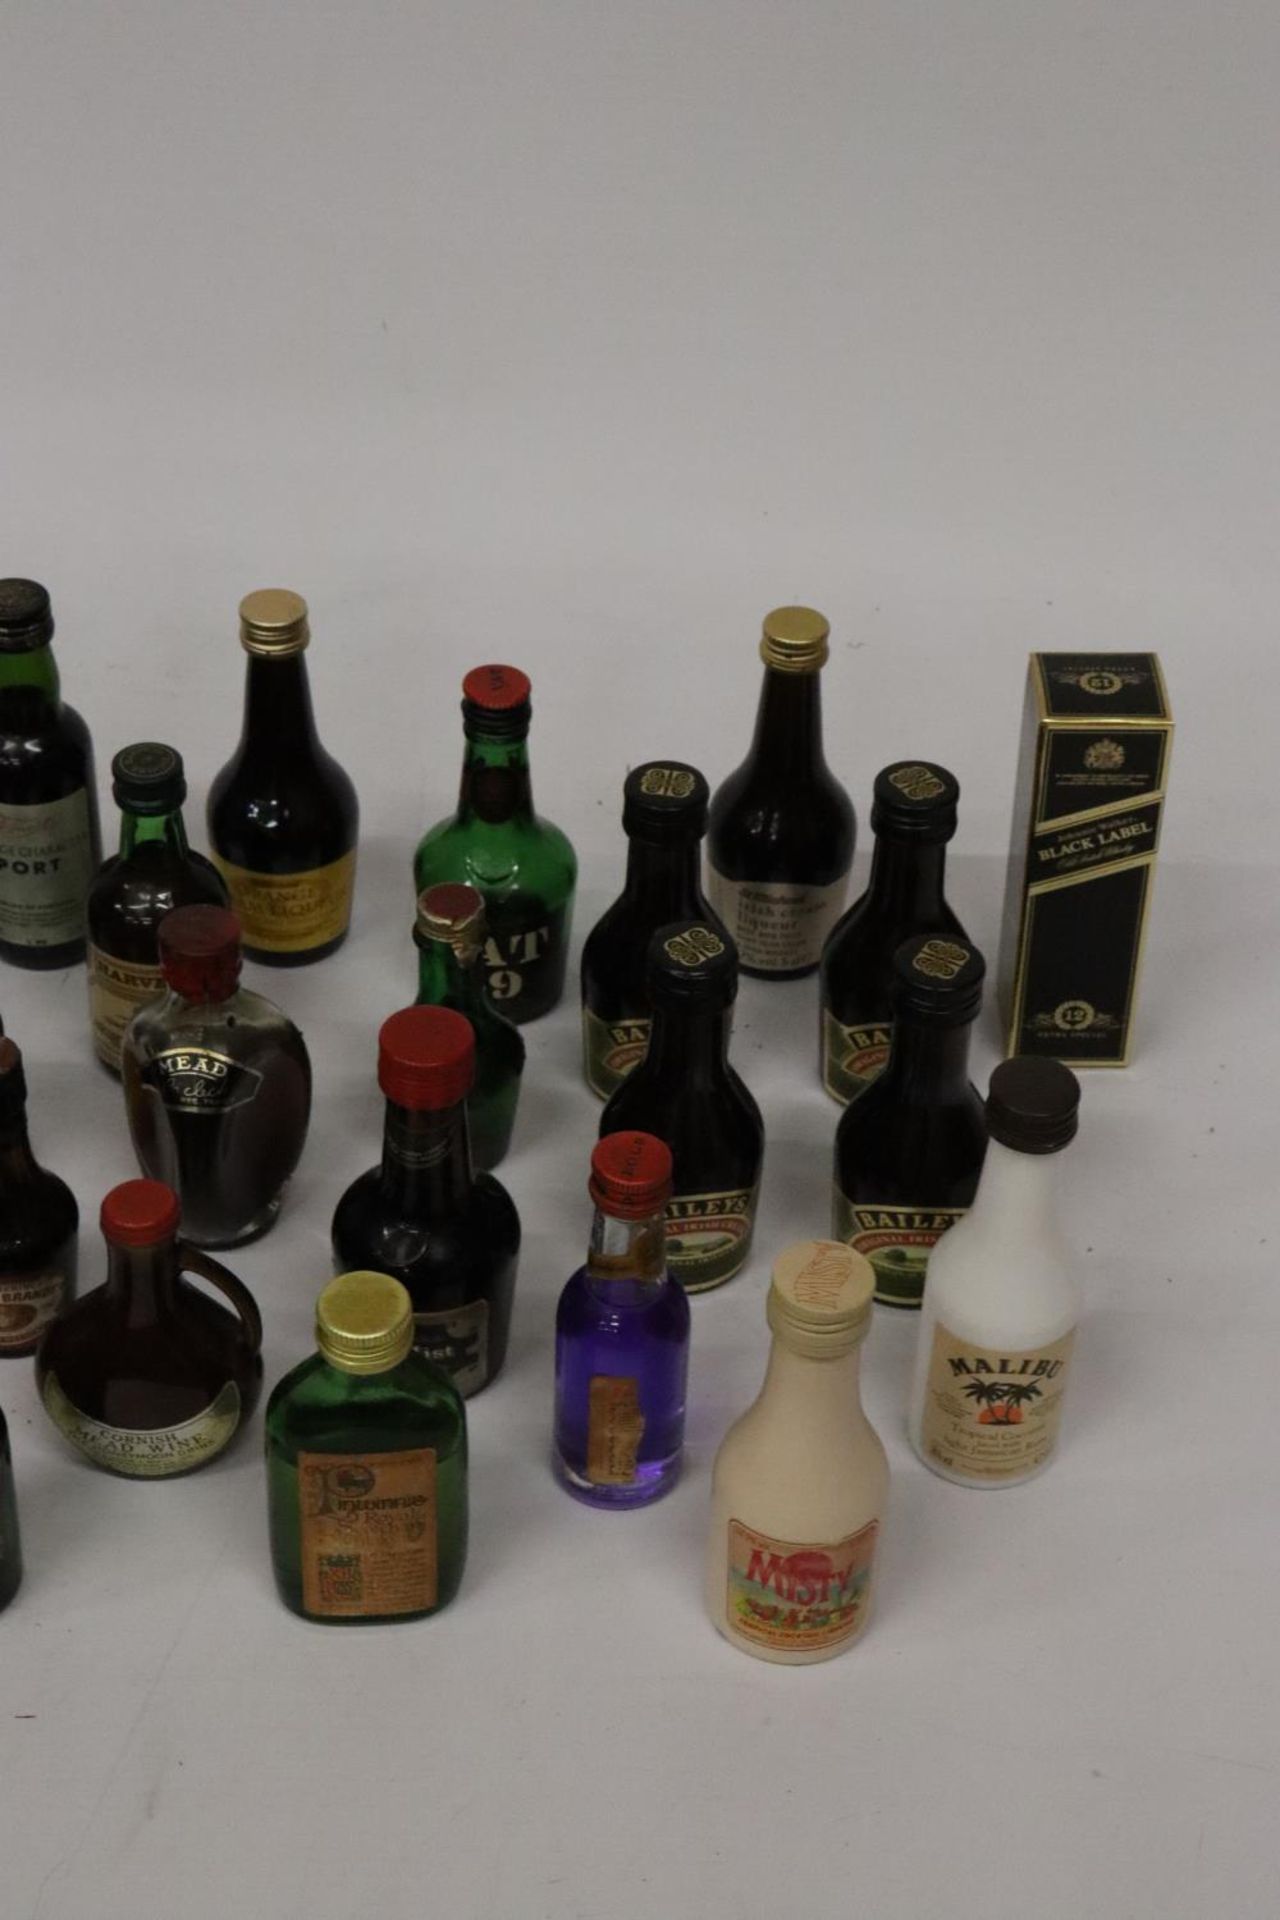 A LARGE QUANTITY OF MINIATURE BOTTLES OF ALCOHOL - Image 5 of 10